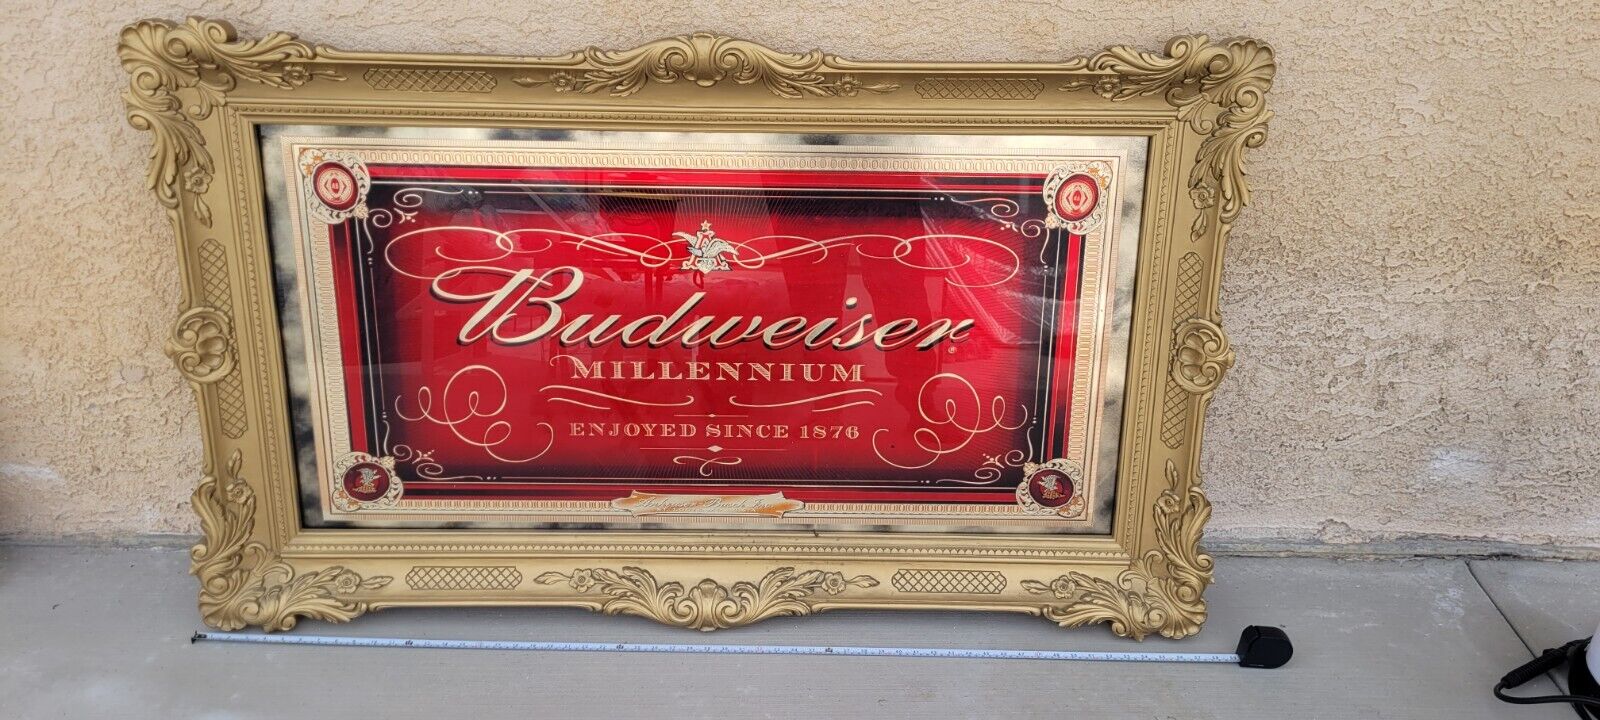 LARGE Budweiser Mirrored Sign - Collectable & Rare Millennium Edition - Bar Sign